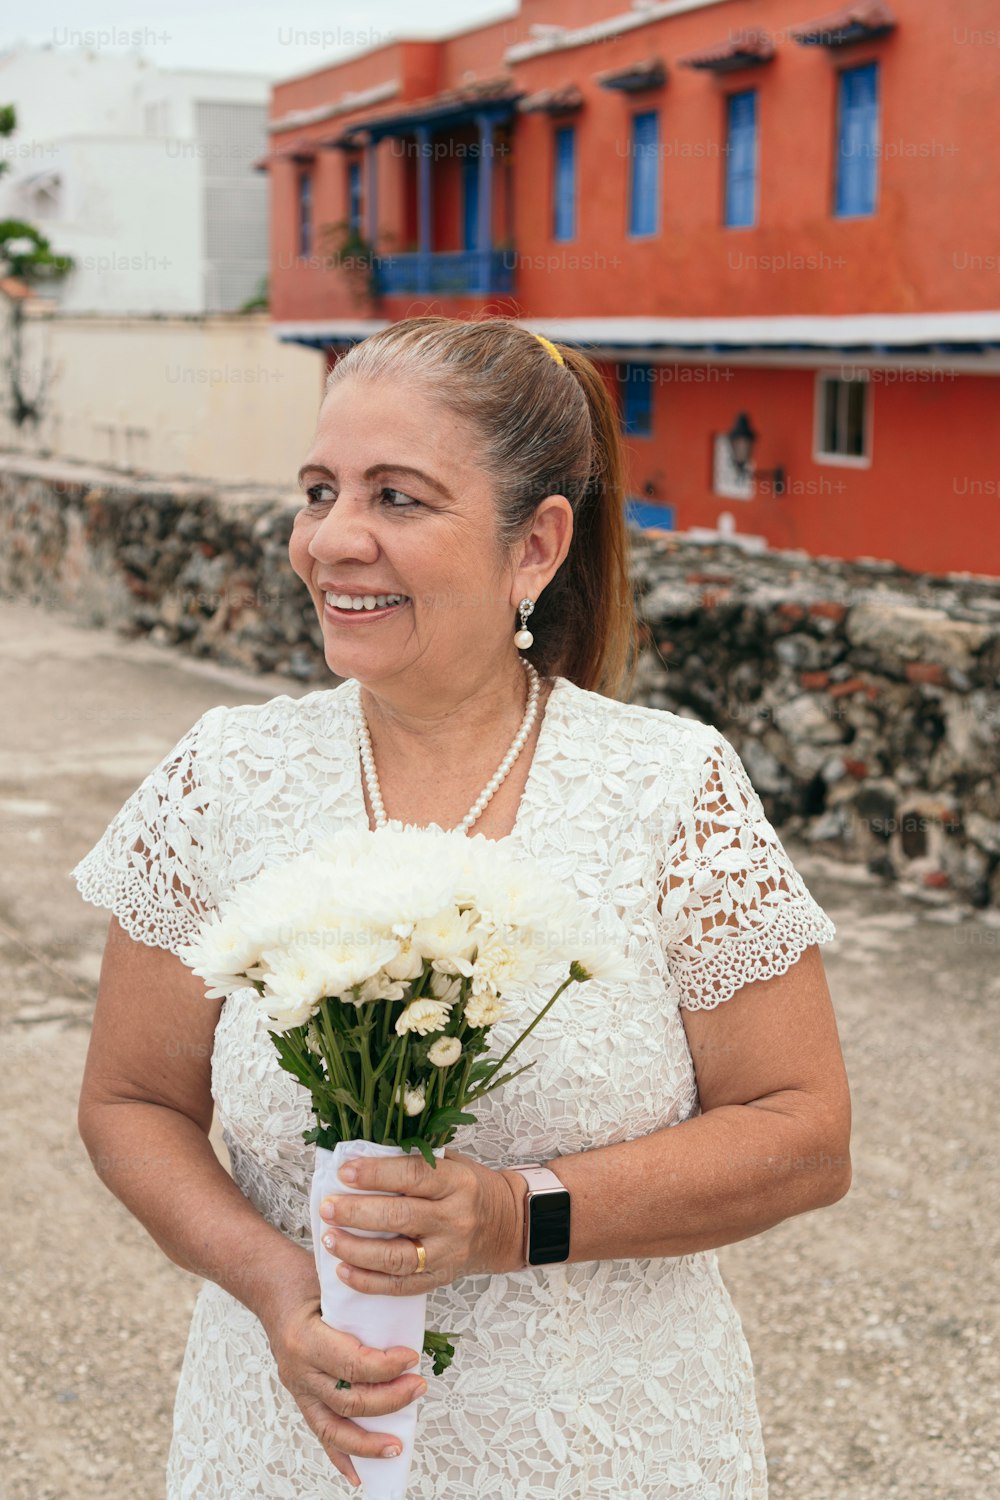 Portrait of bride with a bouquet of flowers in the street